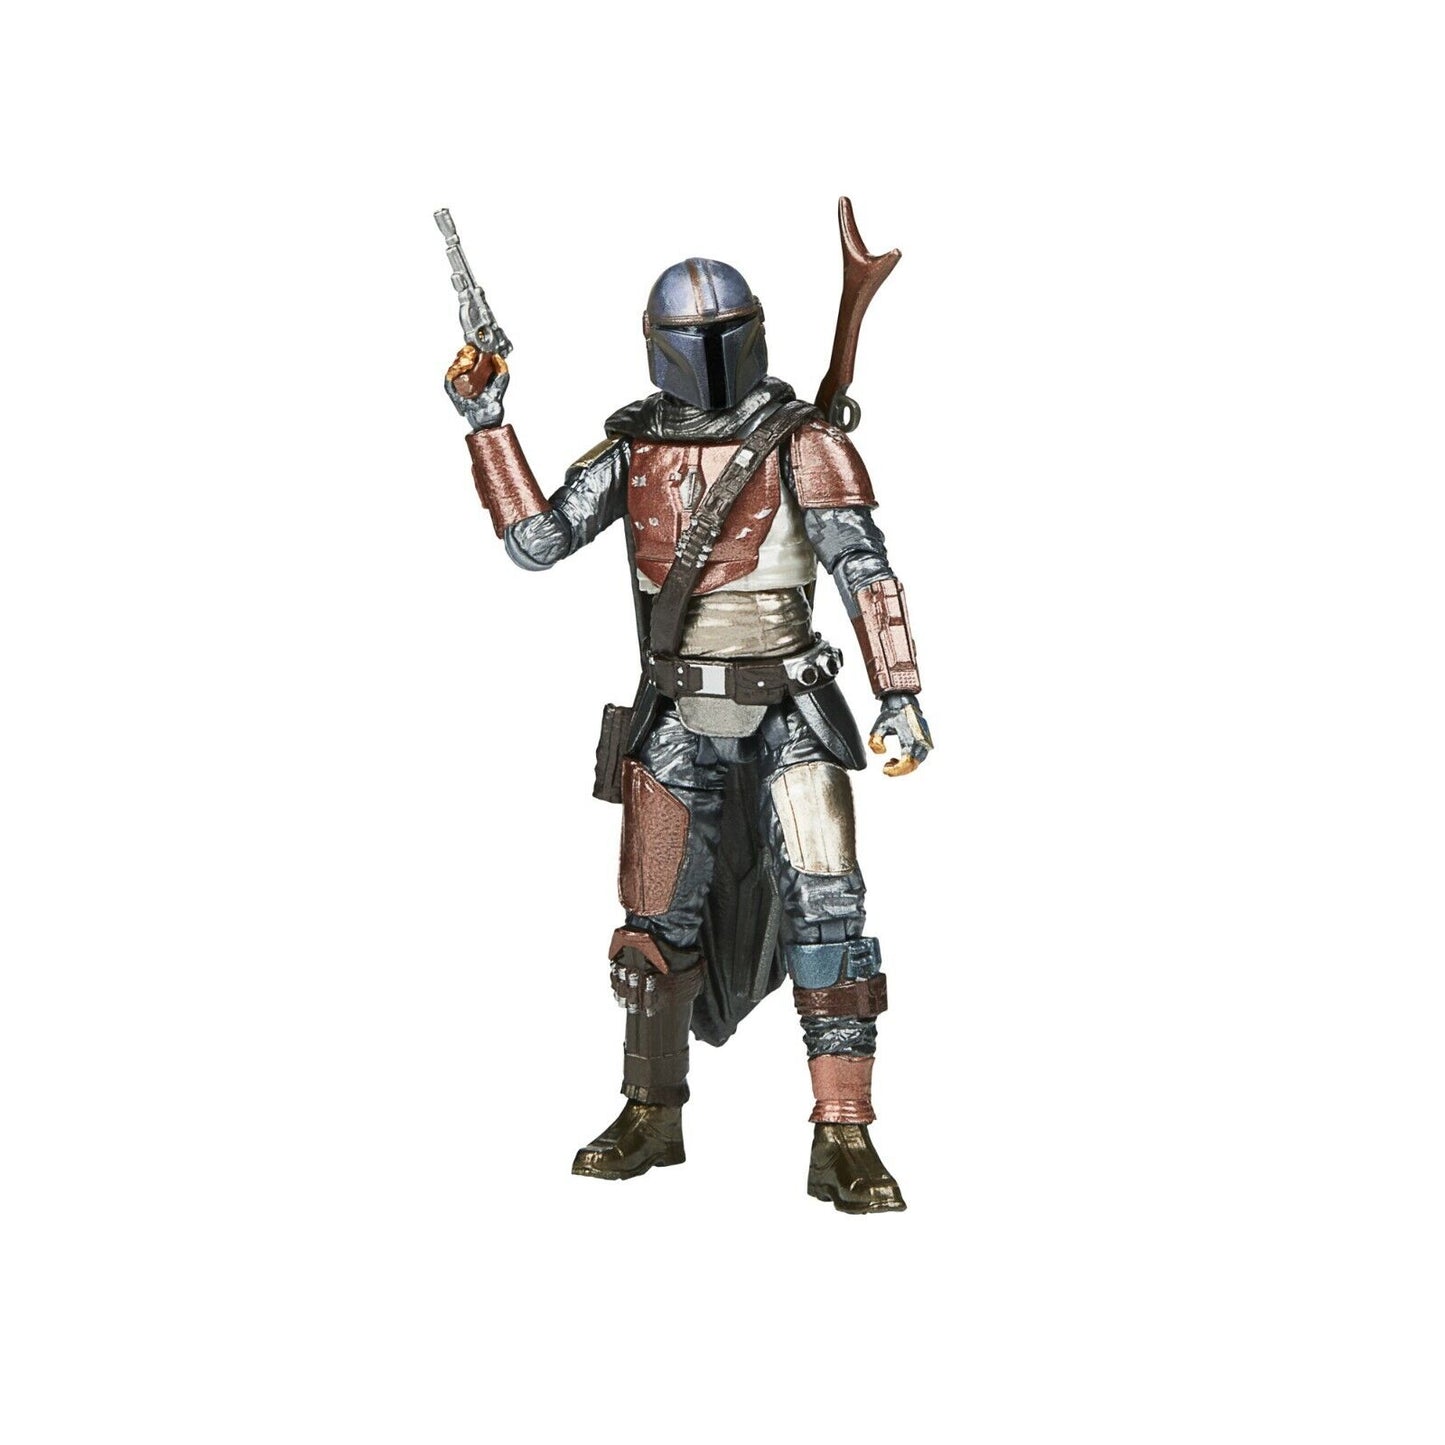 STAR WARS THE VINTAGE CARBON COLLECTION EXCLUSIVE ACTION FIGURE - THE MANDALORIAN